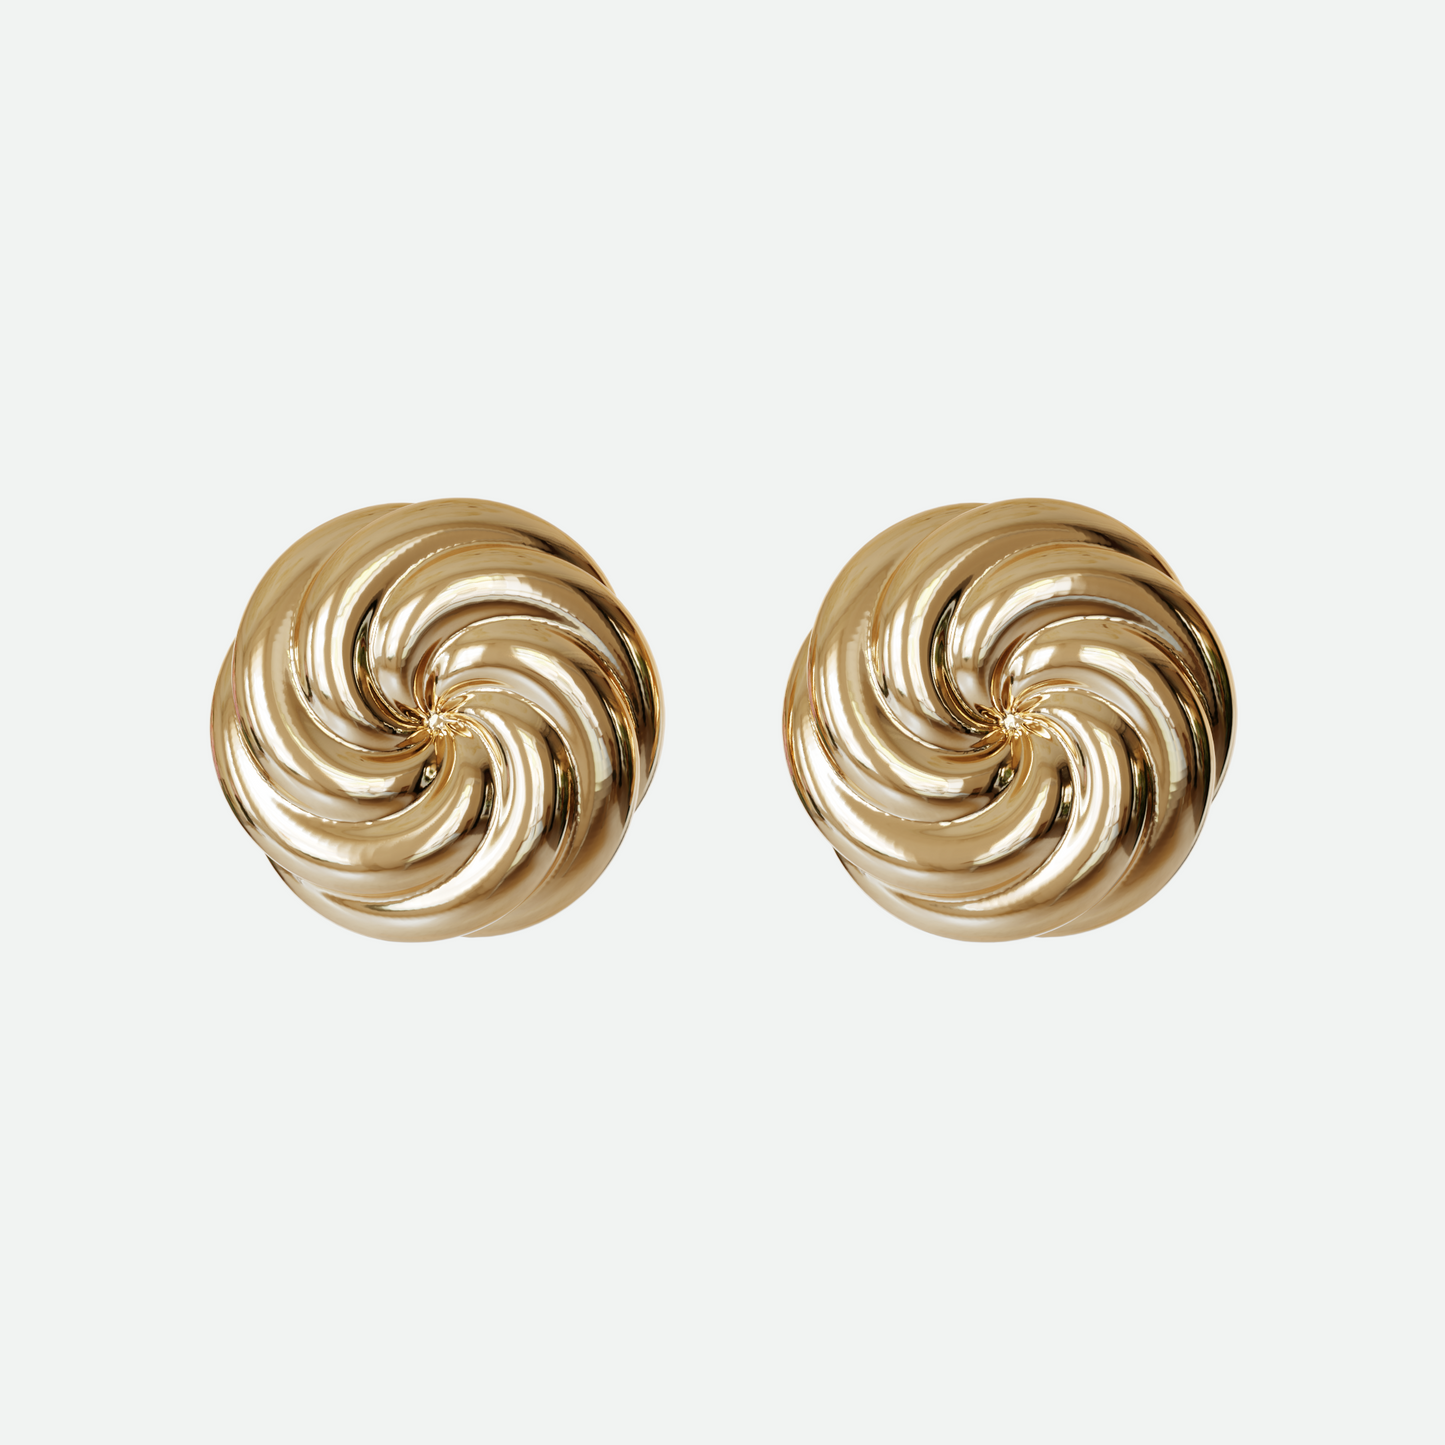 Gold Vortex earring with twin whorls of gold, a beautifully understated design by Ruggeri.